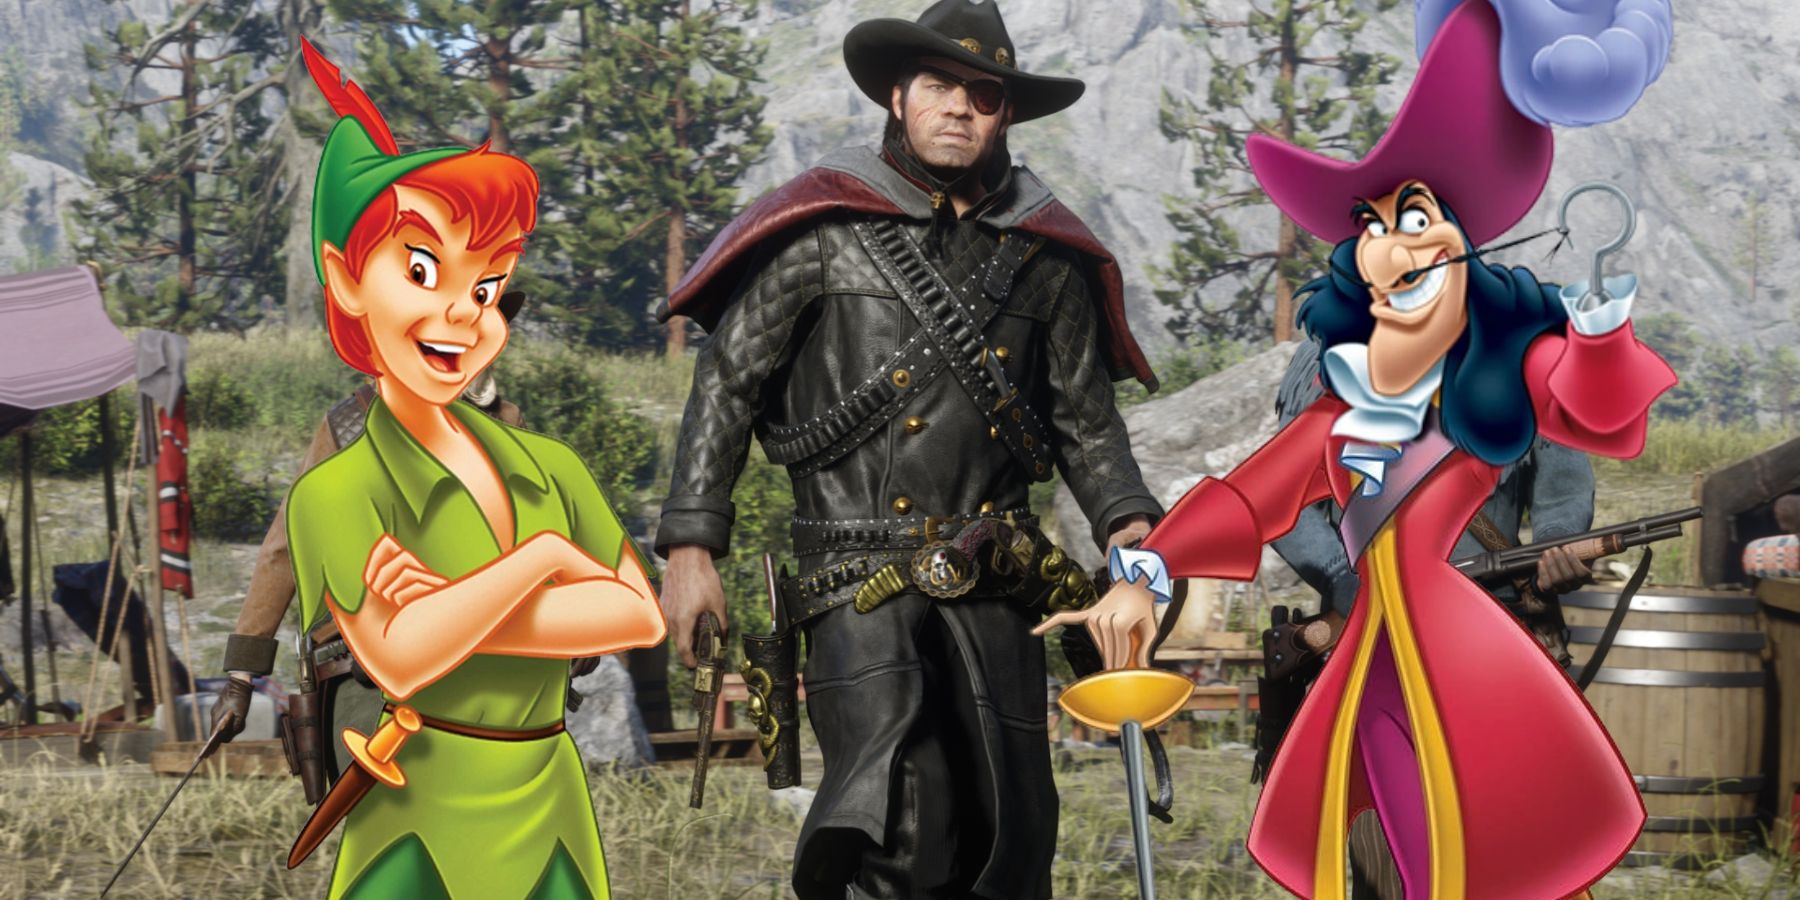 Red Dead Online Players Recreate Peter Pan and Captain Hook in the